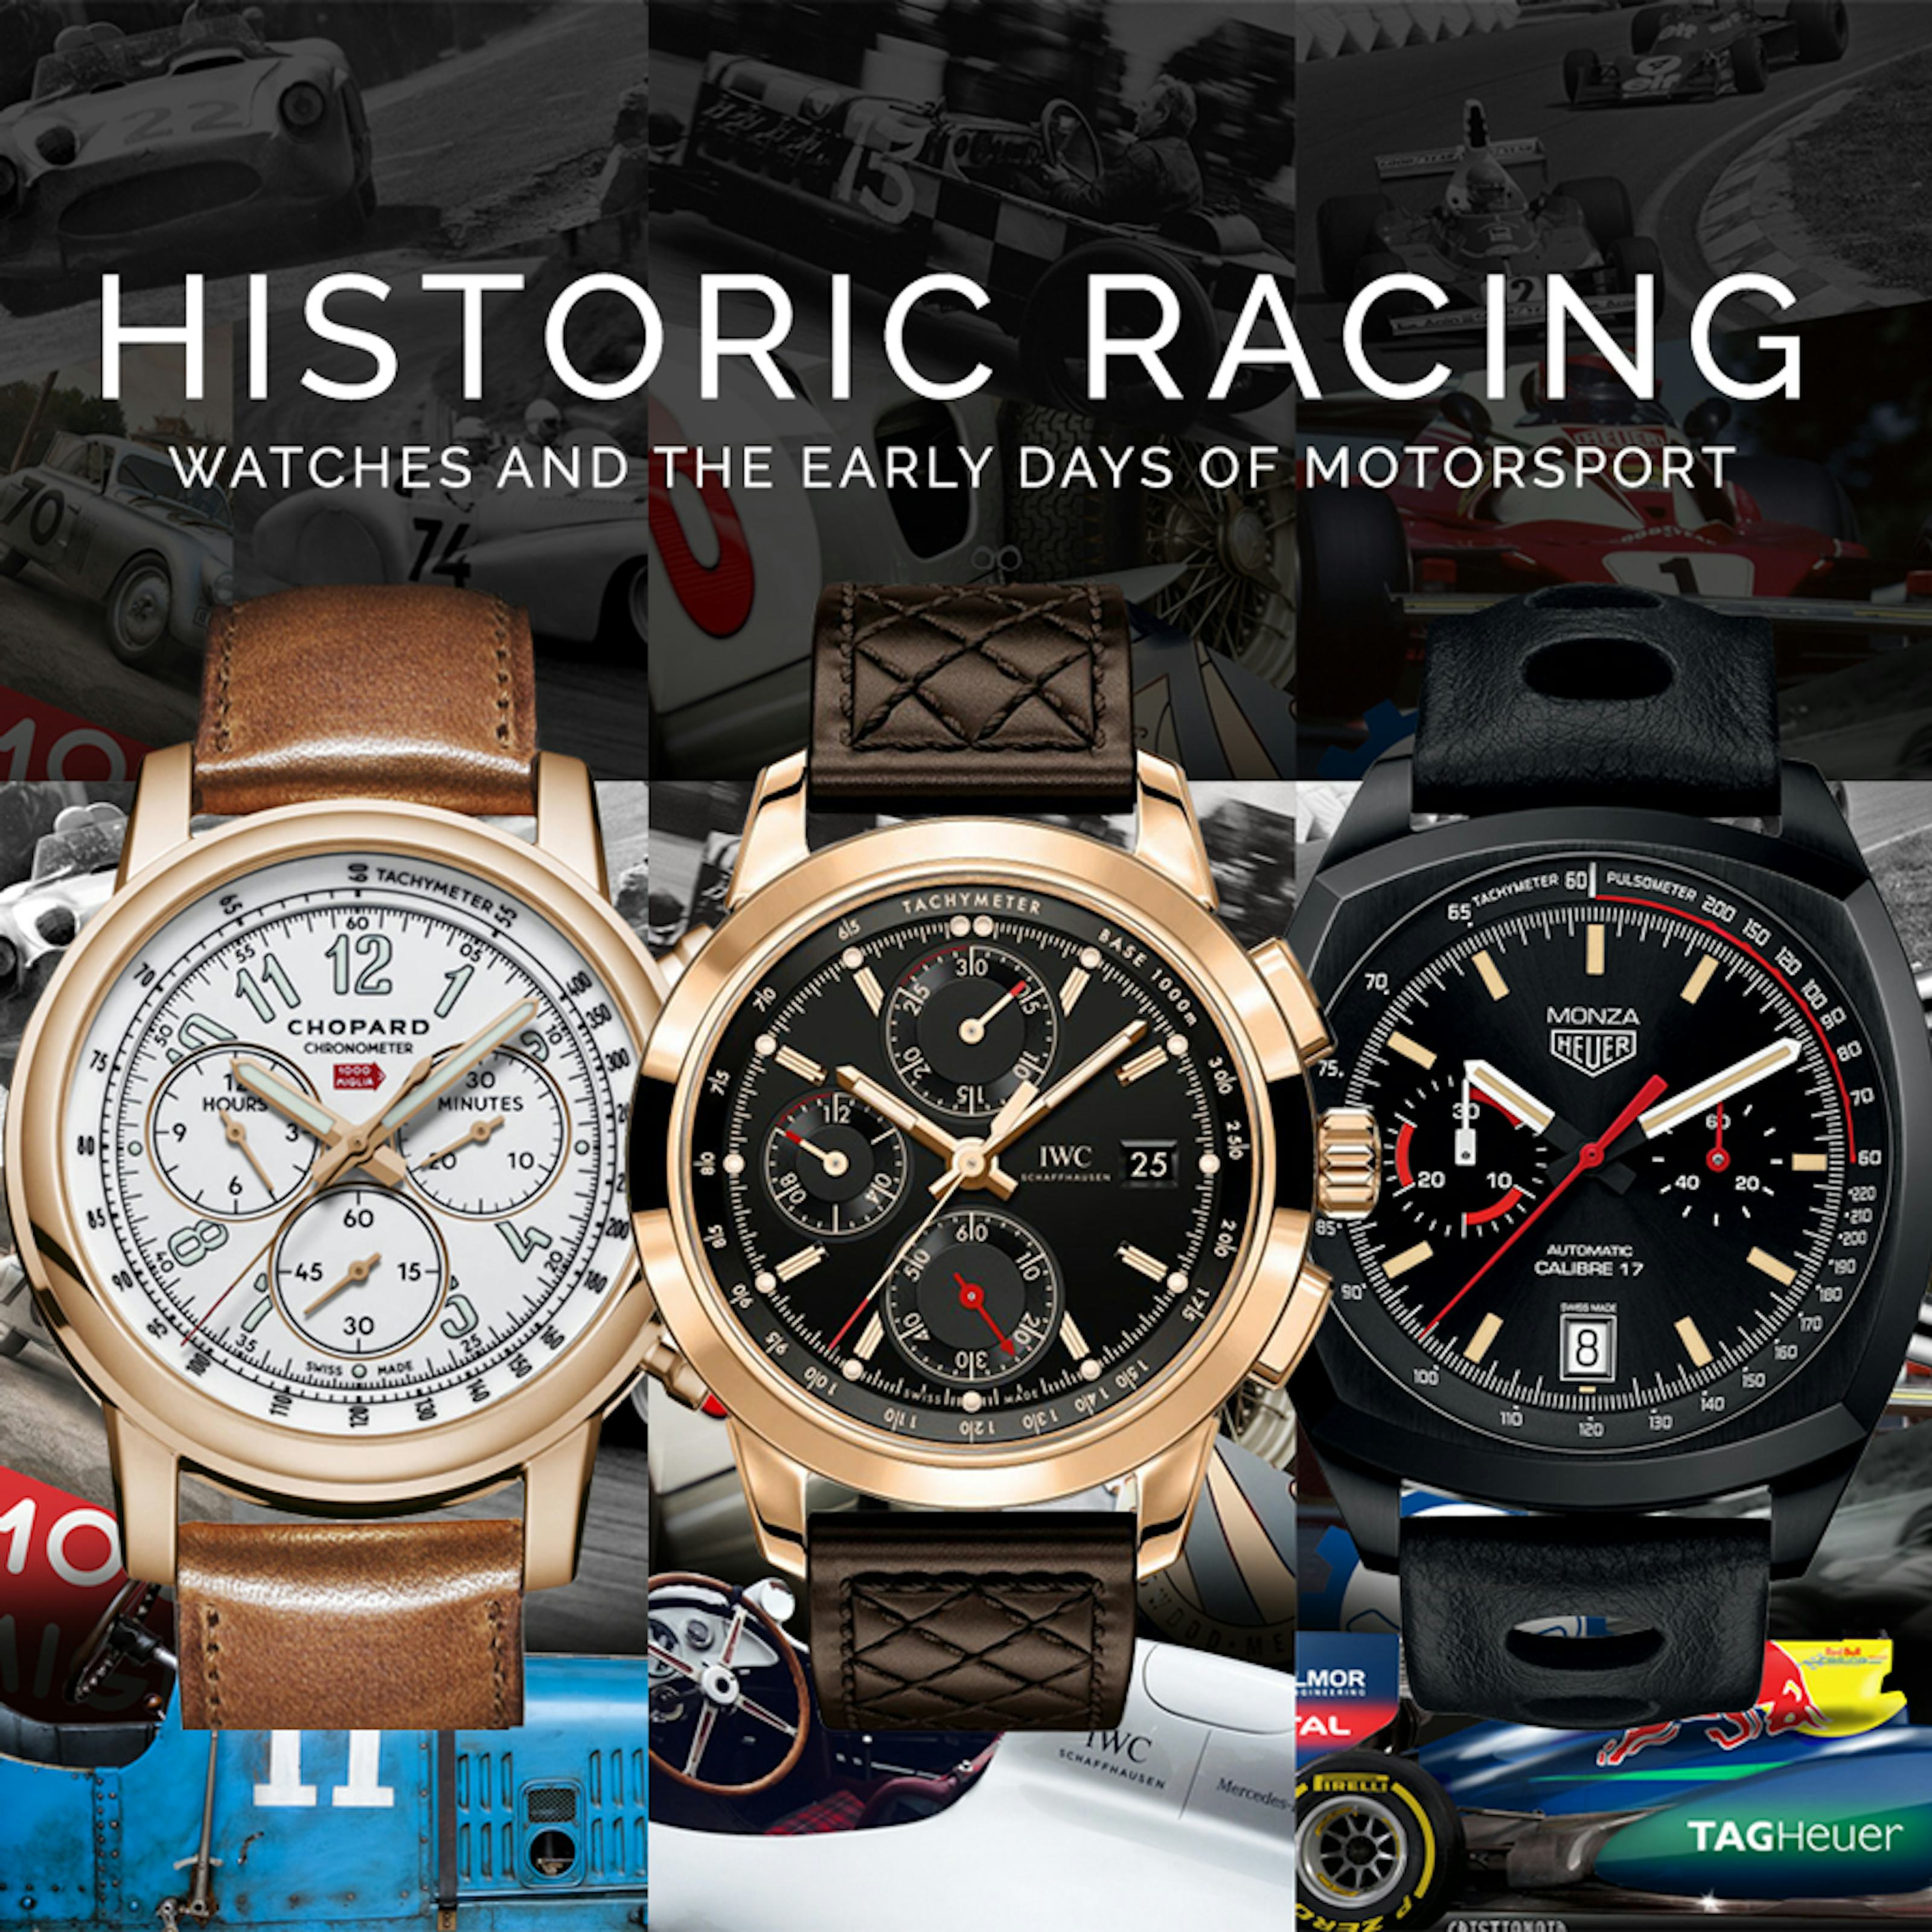 Watches and Historic Racing